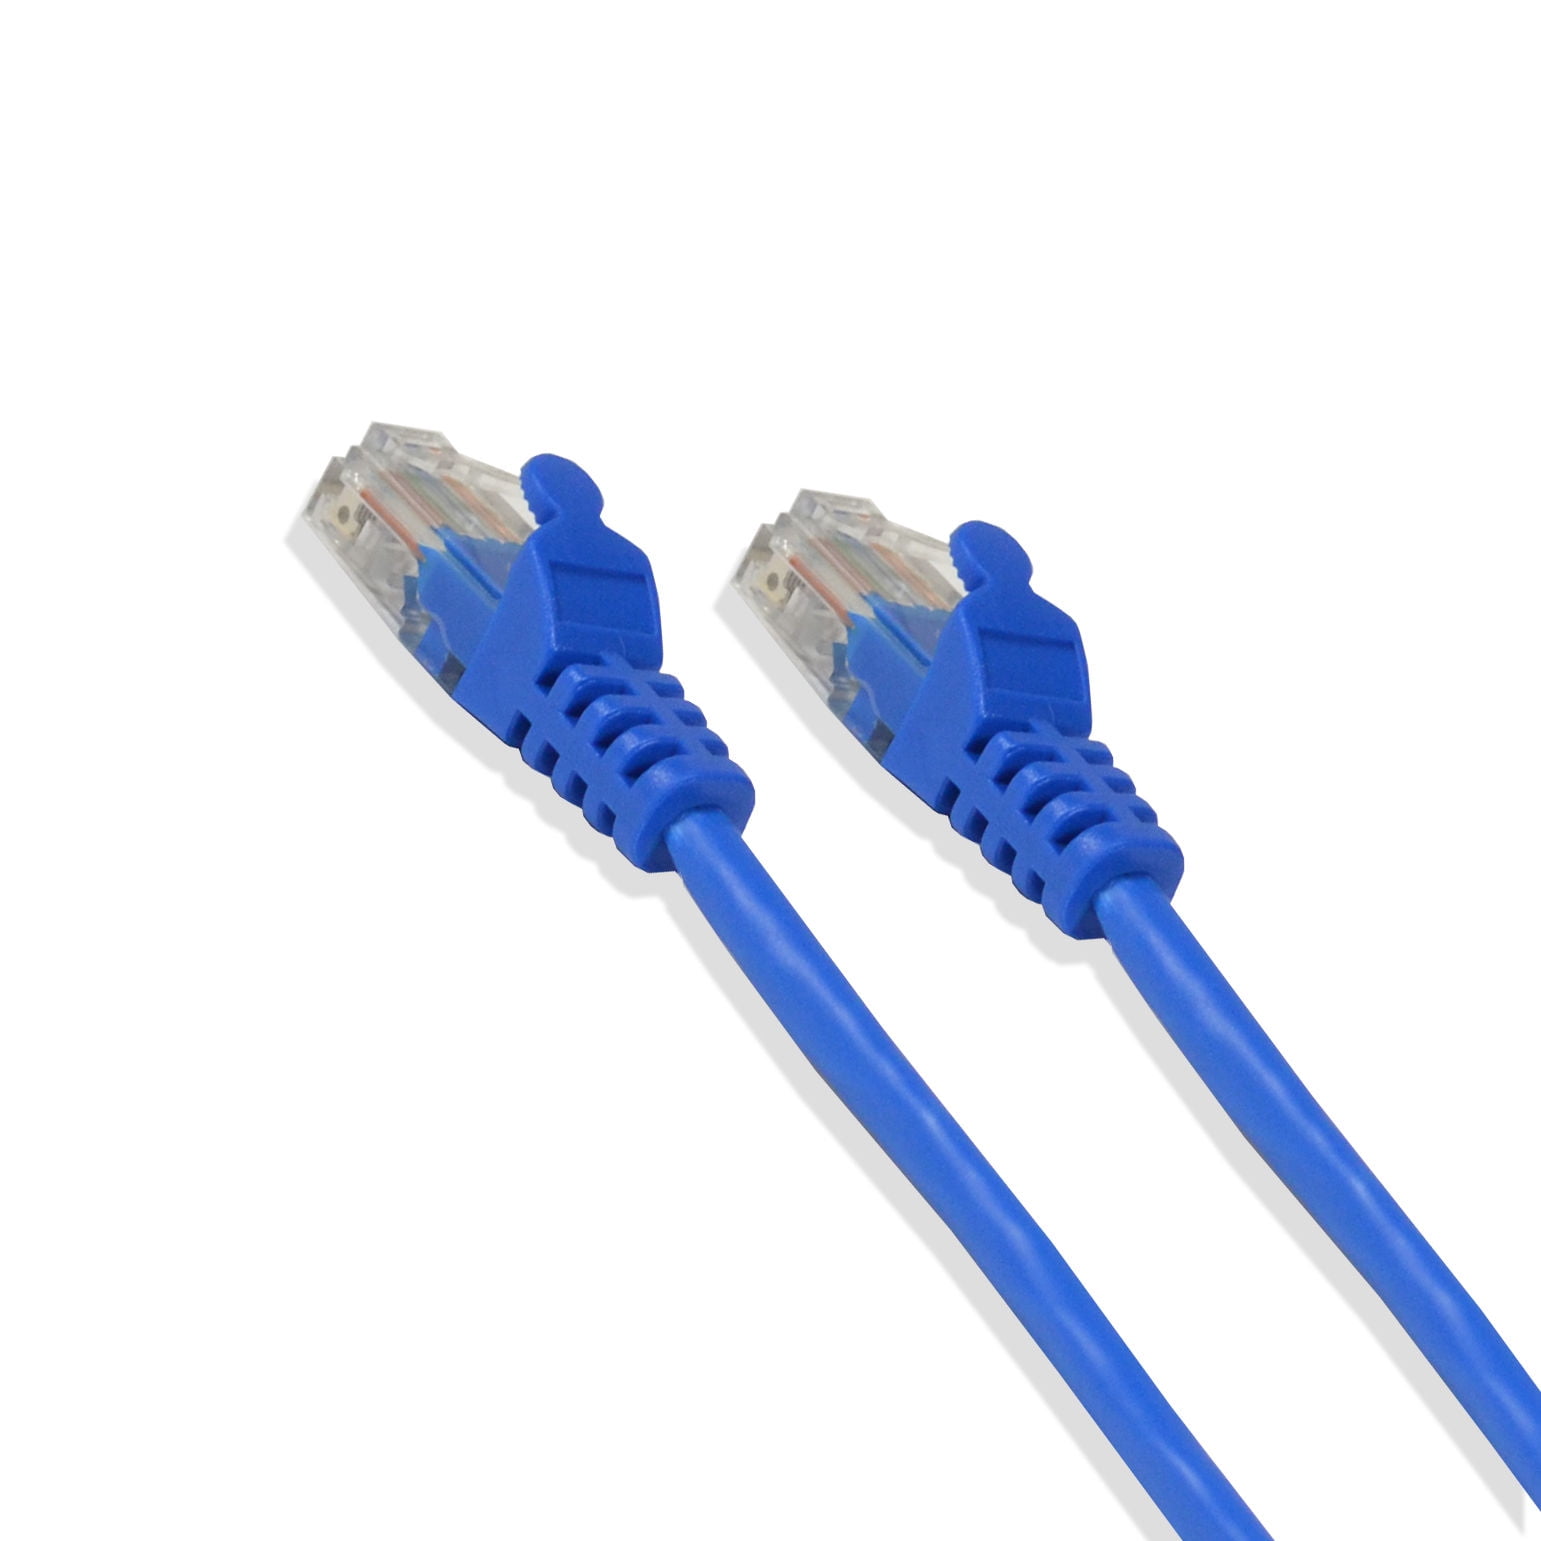 LOGICO Cat6 UTP Ethernet Patch Cable 550Mhz 24Awg Blue 25Ft 3 Pack